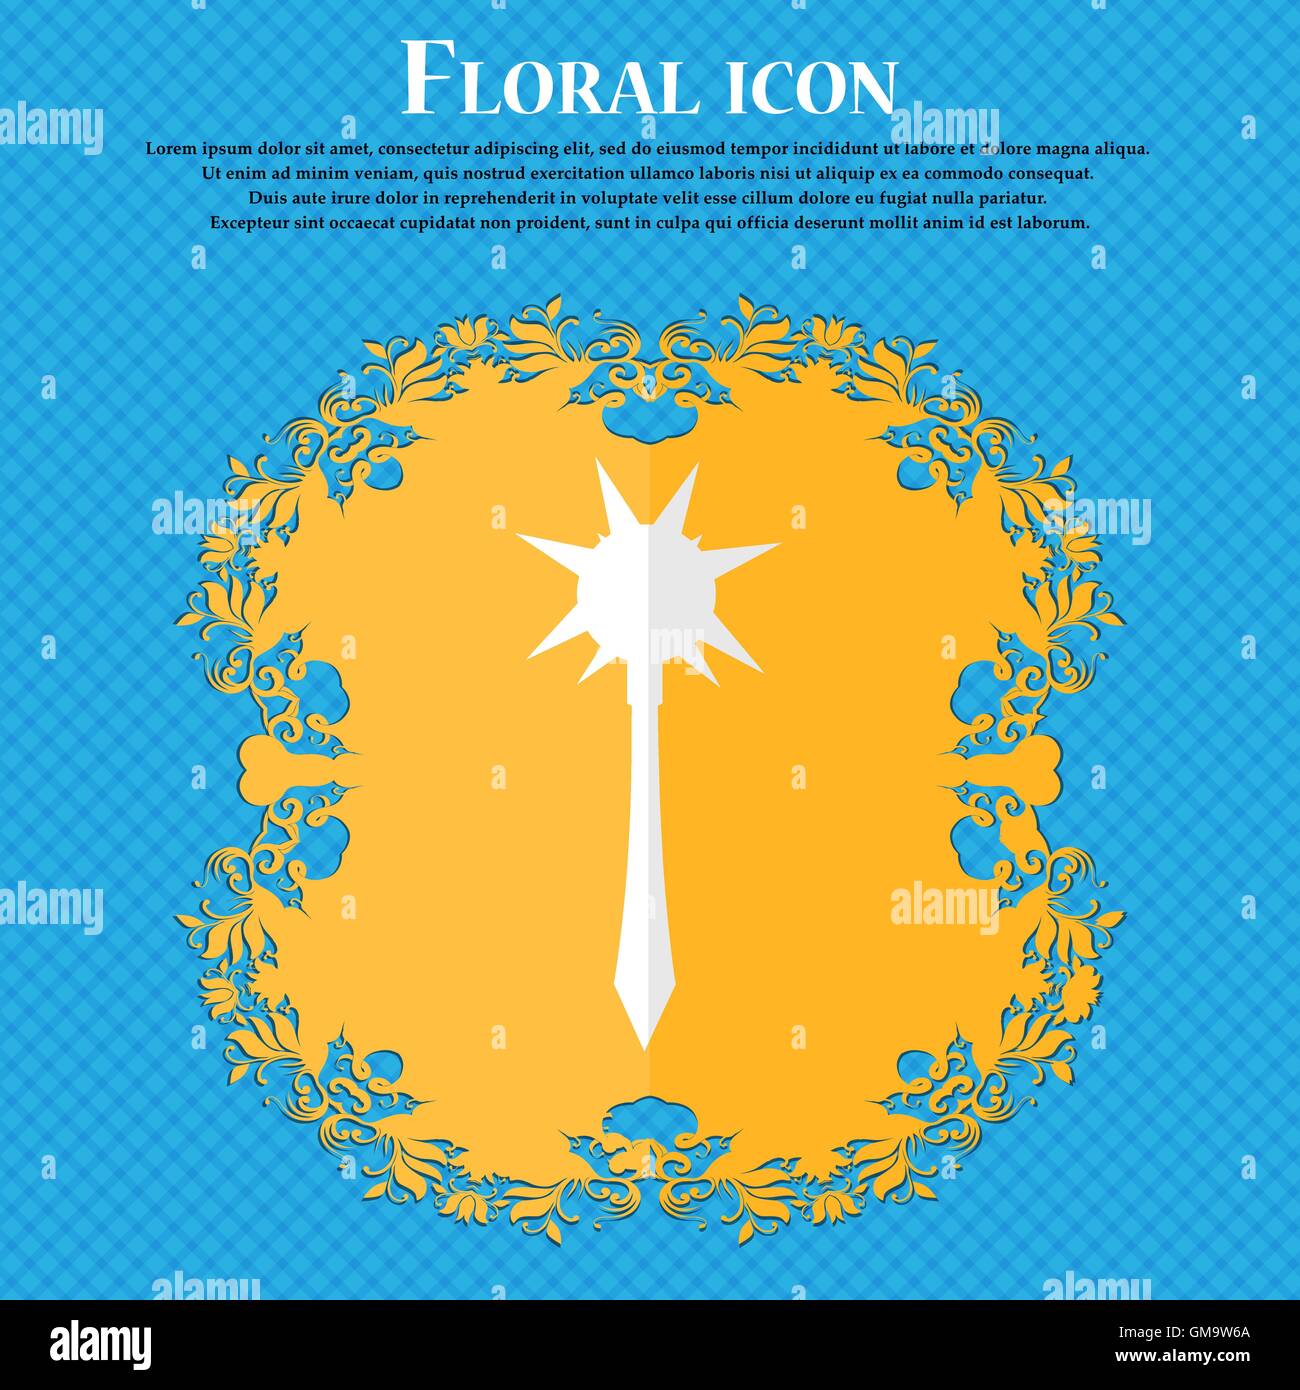 Mace. Floral flat design on a blue abstract background with place for your text. Vector Stock Vector